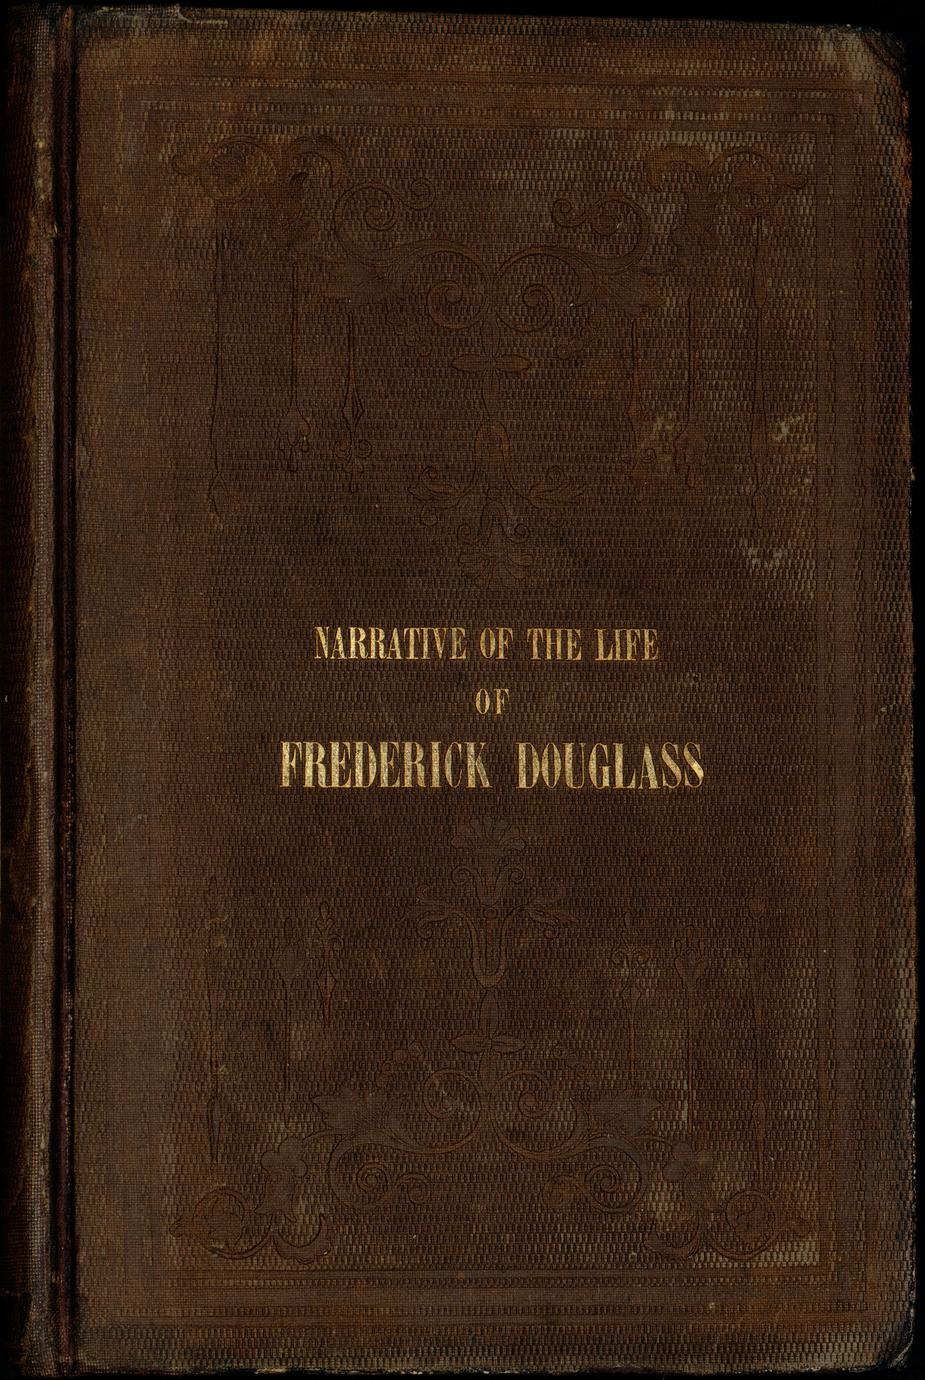 Narrative of the life of Frederick Douglass, an American slave (1 of 2)